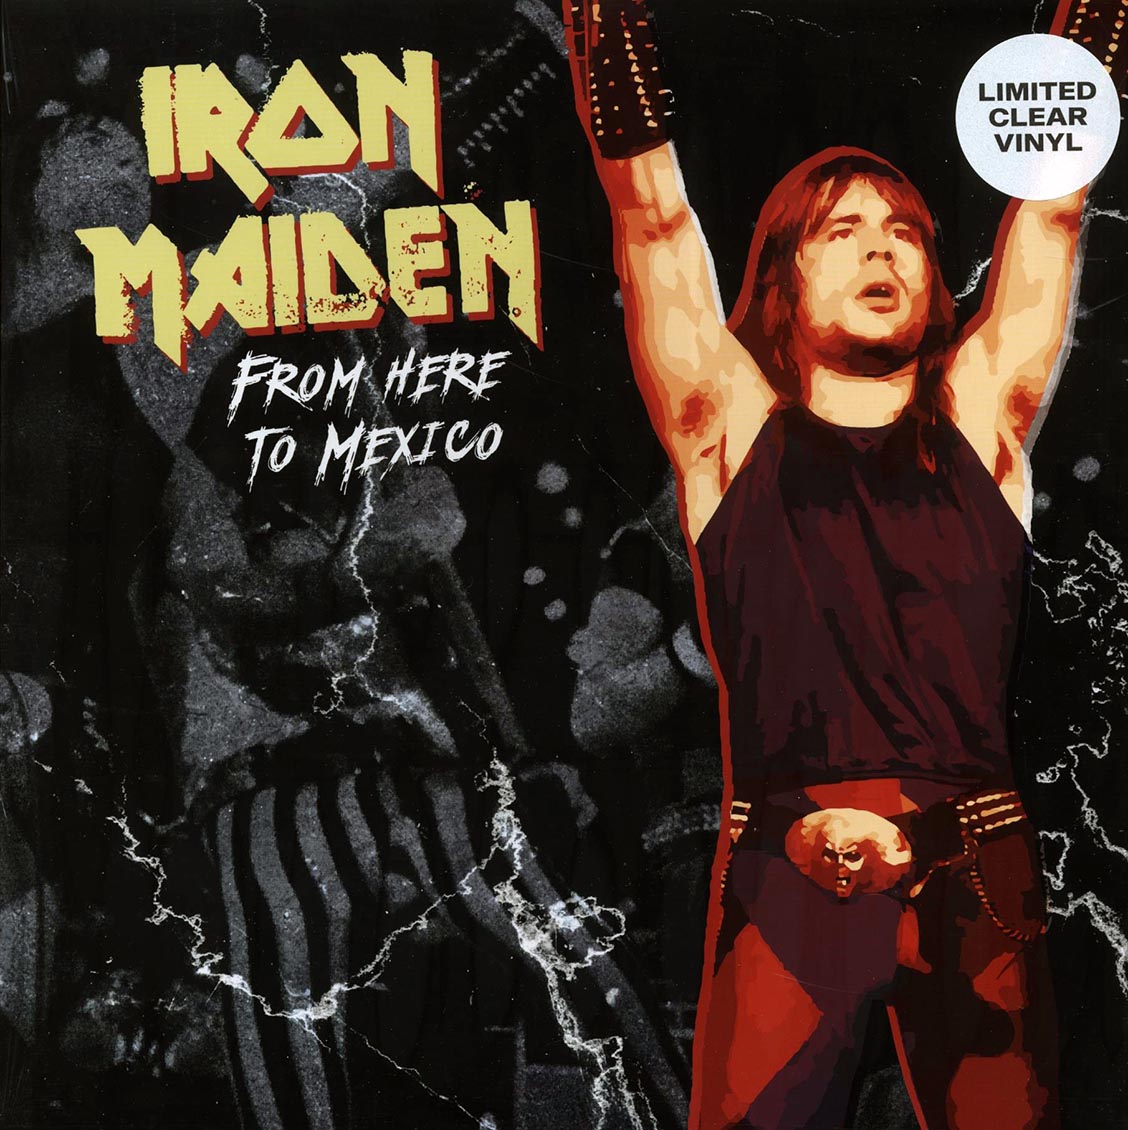 Iron Maiden - From Here To Mexico (ltd. ed.) (clear vinyl) - Vinyl LP